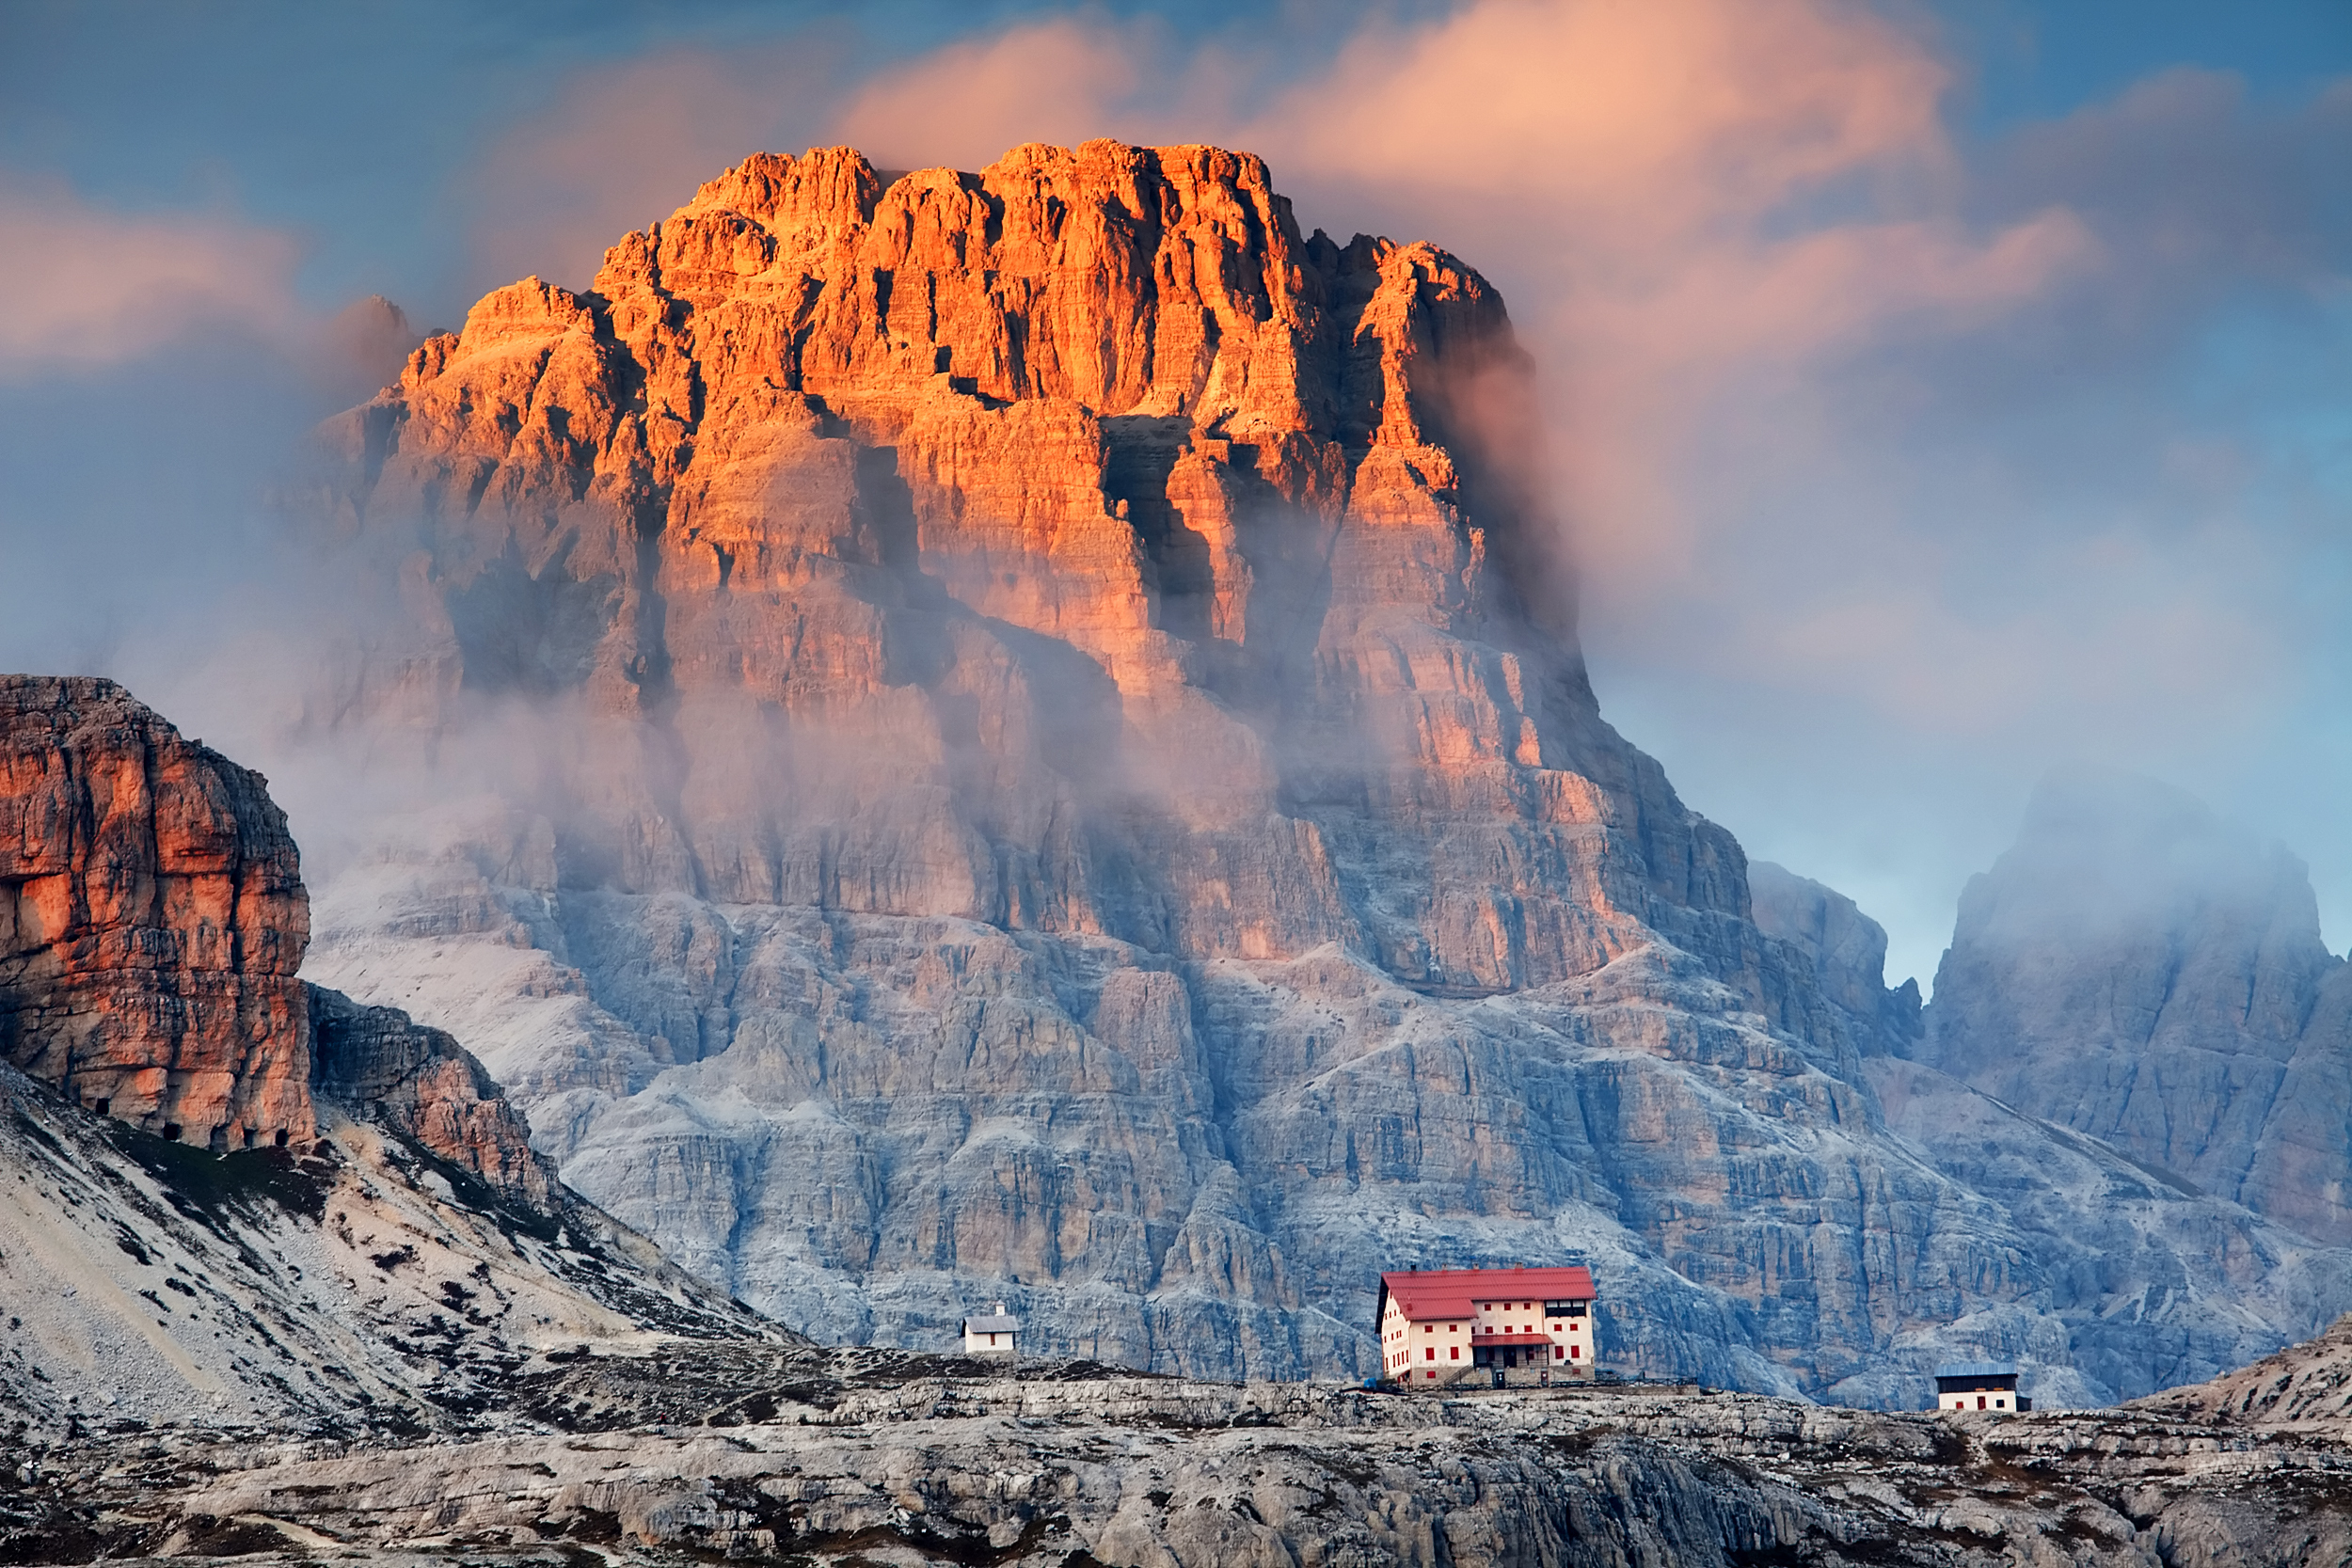 10 Stunning Photos Of The Dolomites | Unofficial Networks